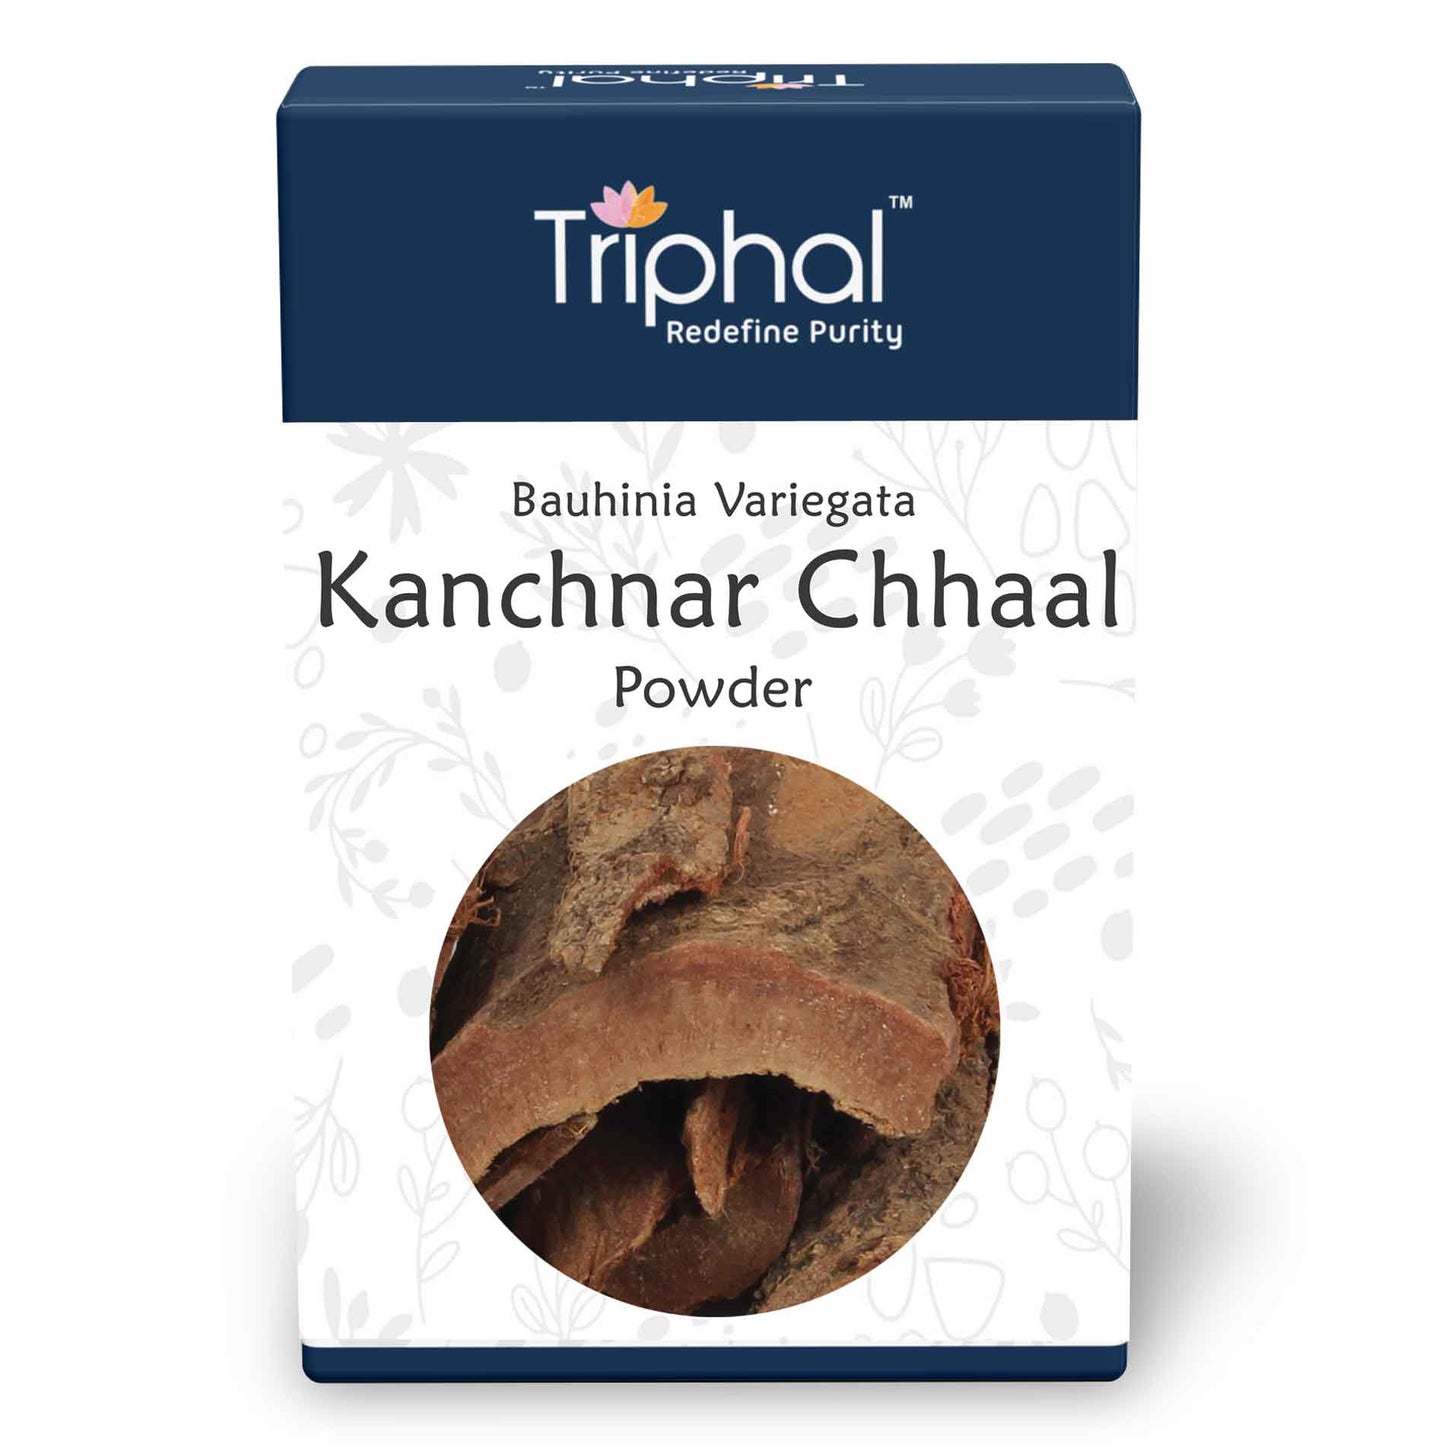 Kanchnar Bark Powder - Kachnar Chal Churn by Triphal is 100% pure and original without any added color, fragrance or preservatives